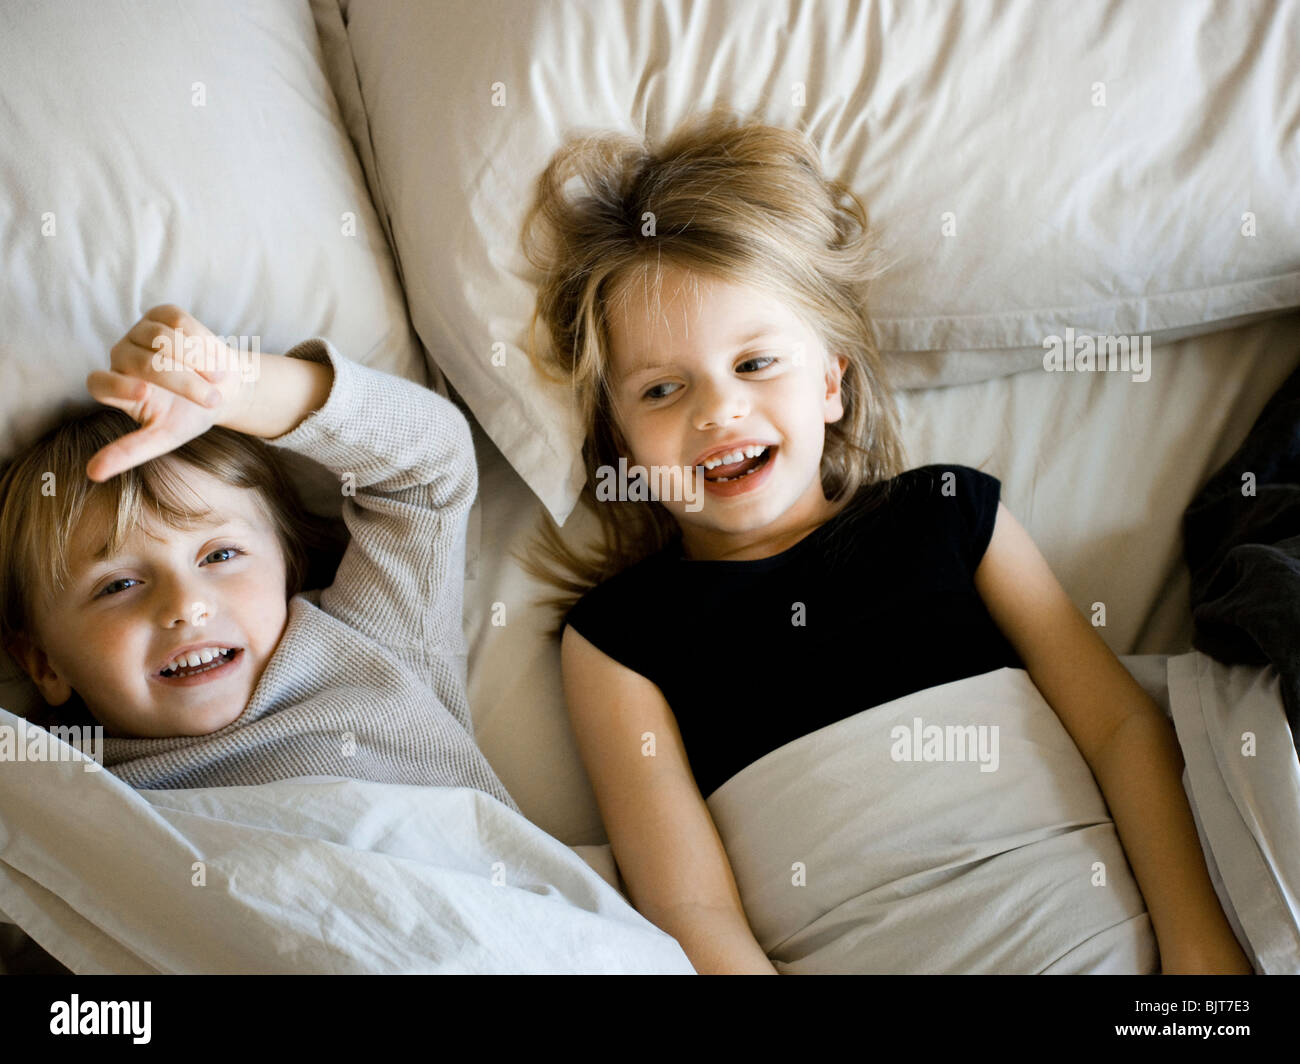 USA, Utah, Provo, Portrait of brother and sister (2-5) lying in bed Stock Photo